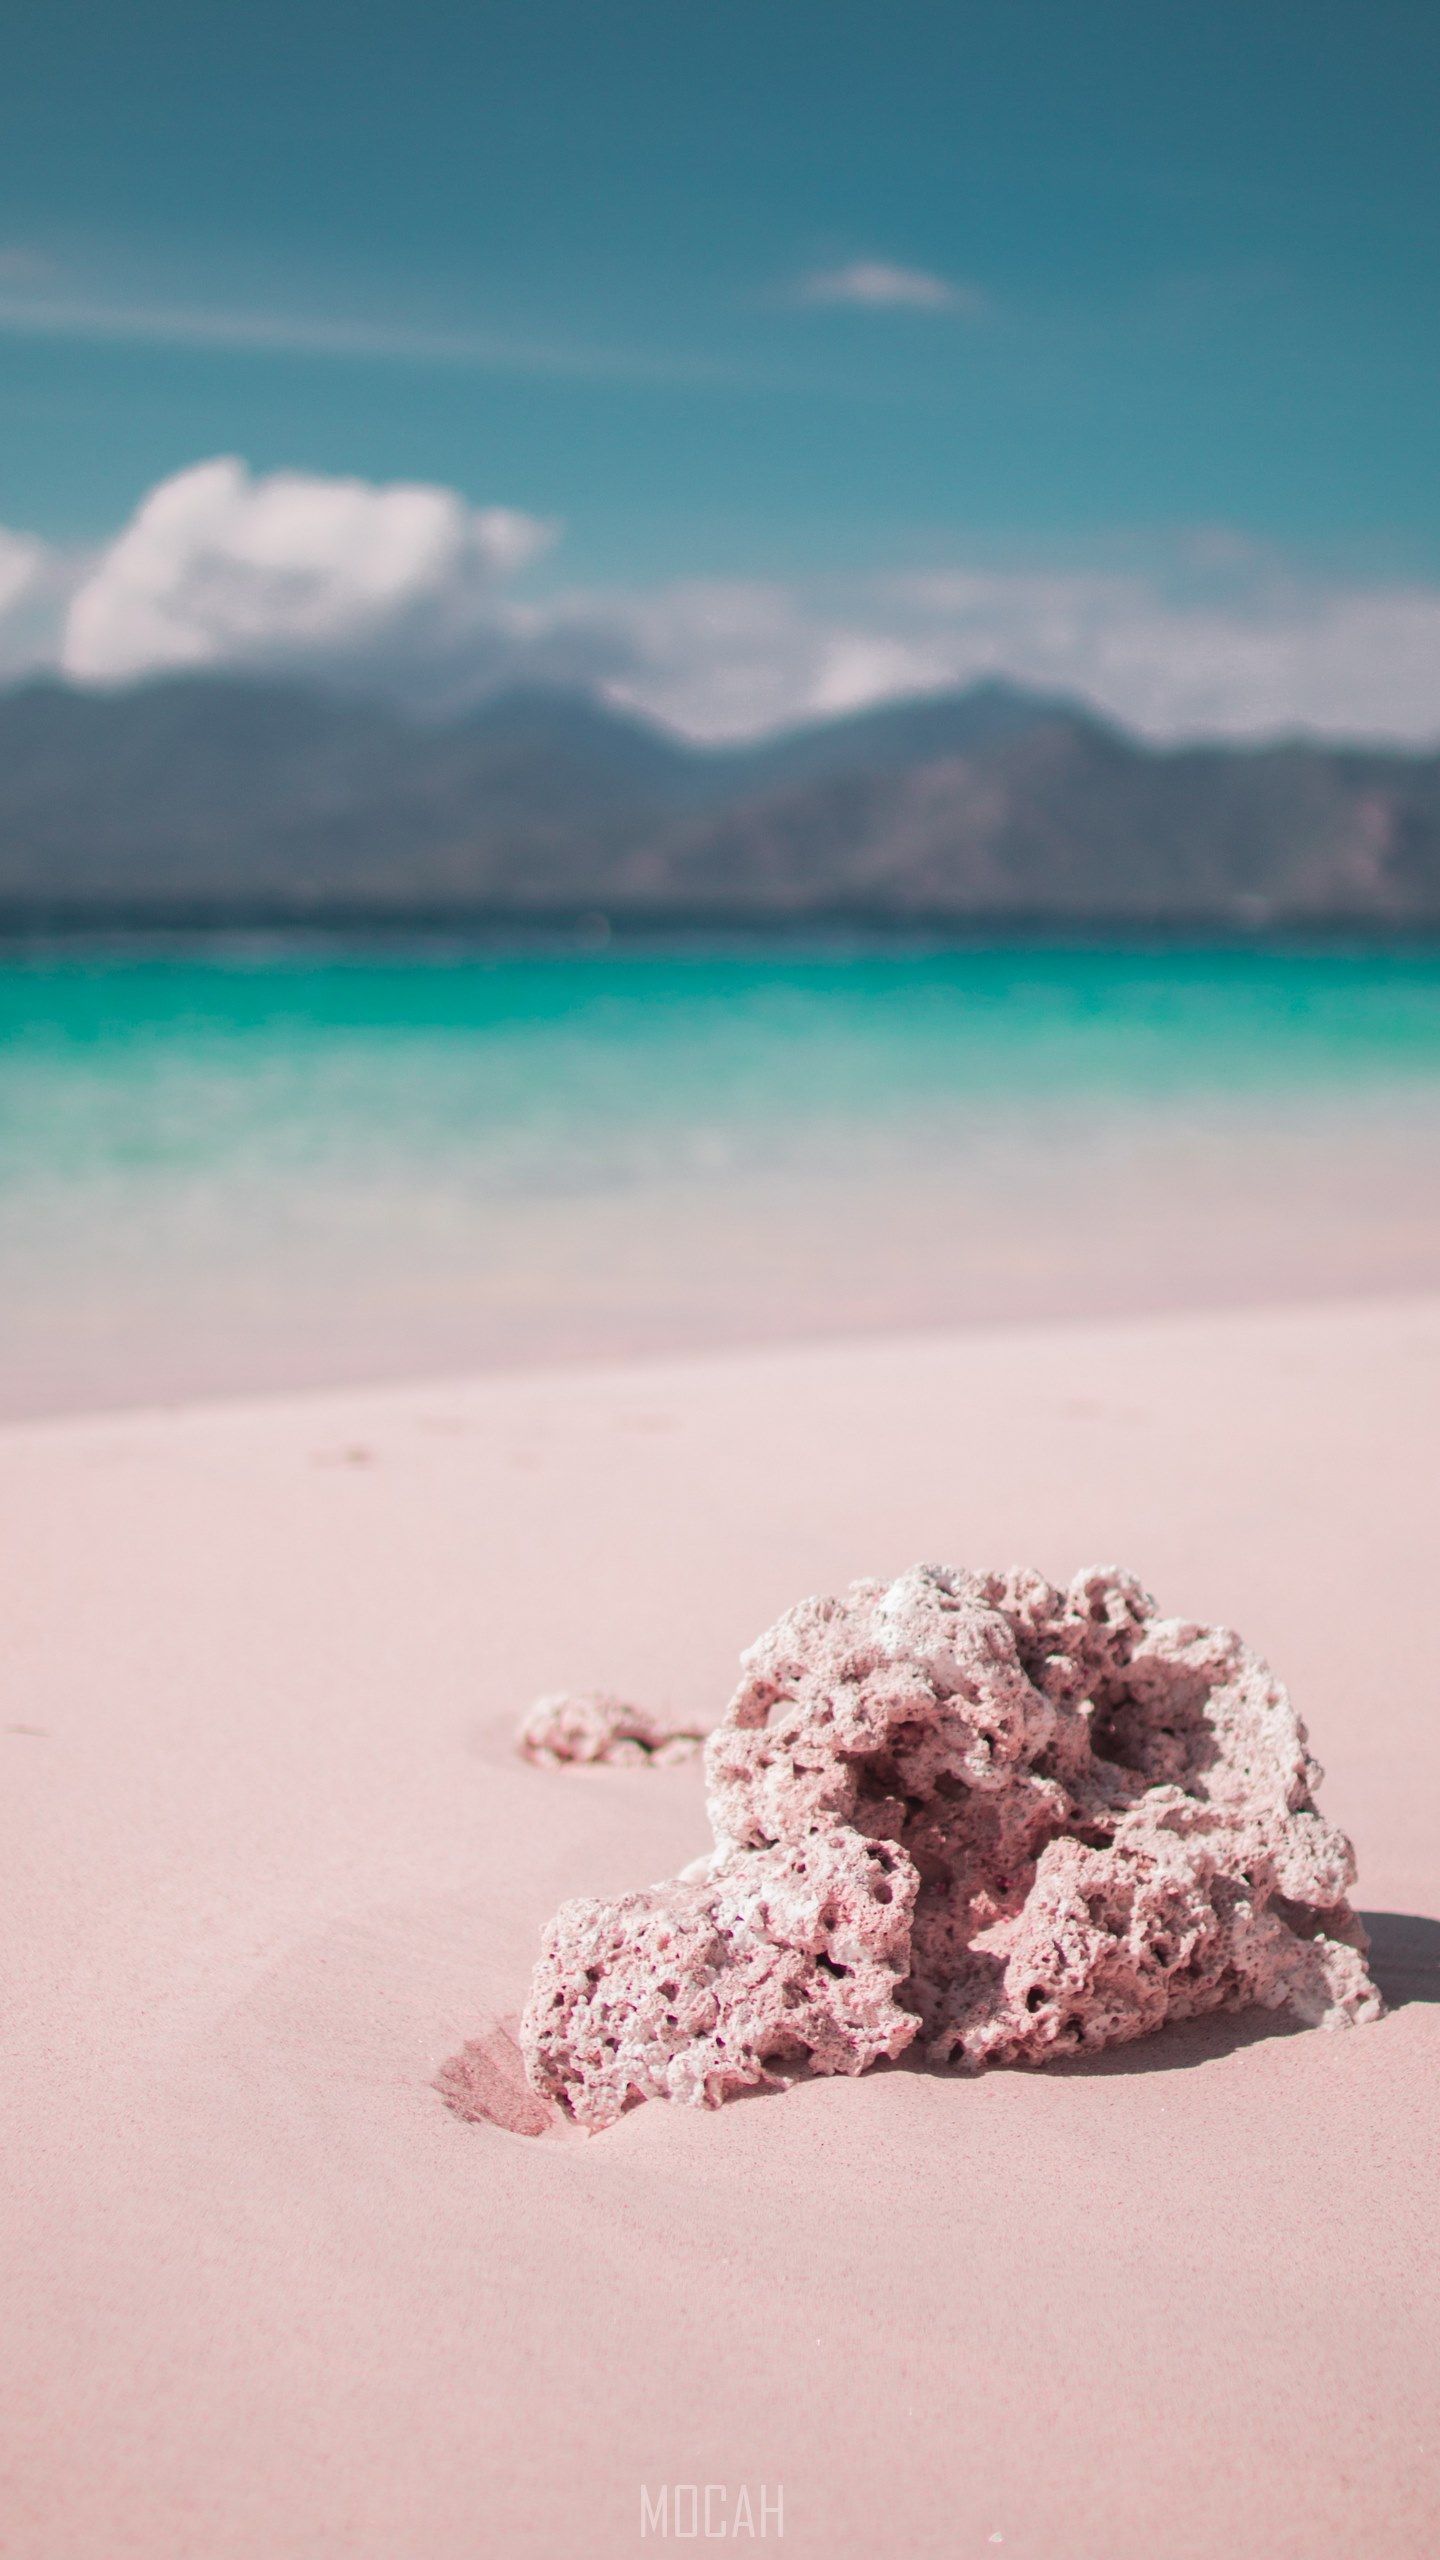 coral beach sand and shore hd, Huawei Mate 9 Pro wallpaper free download, 1440x2560 Gallery HD Wallpaper